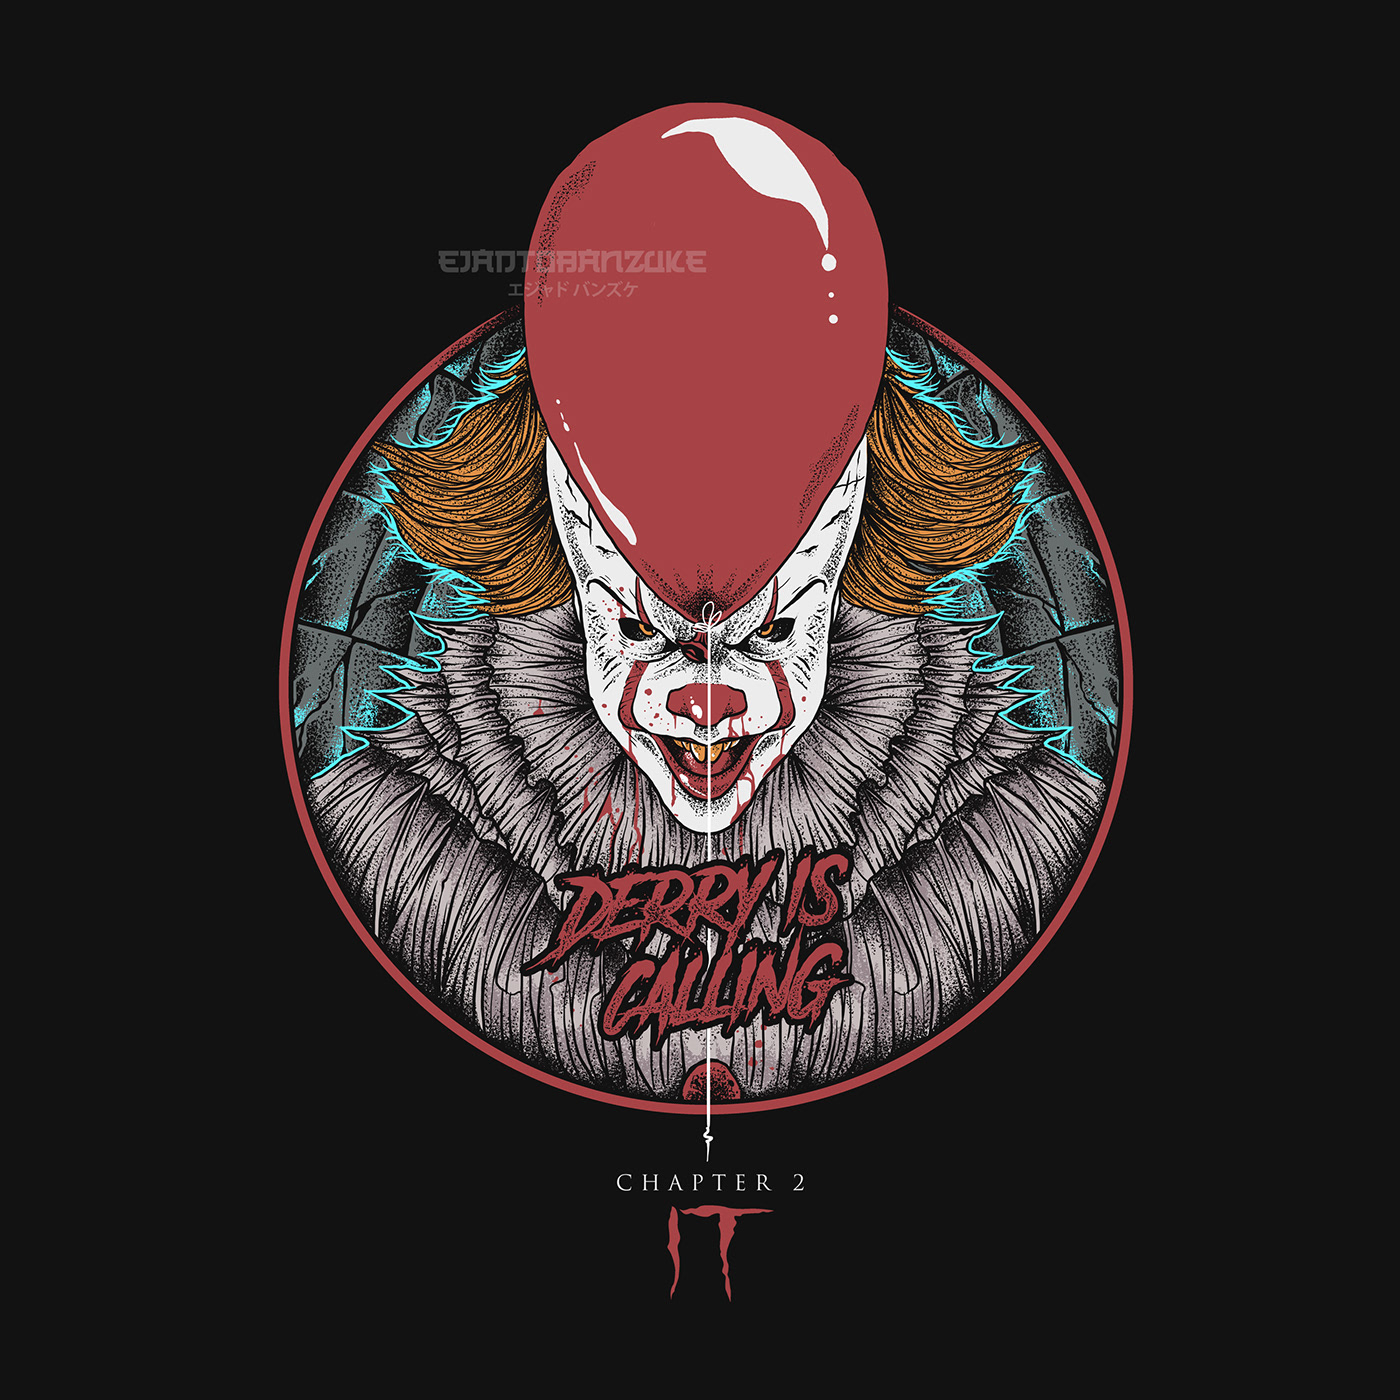 IT IT chapter 2 pennywise clown Horror Movies horror merch ILLUSTRATION  t shirt design Poster Design fright rags creep show